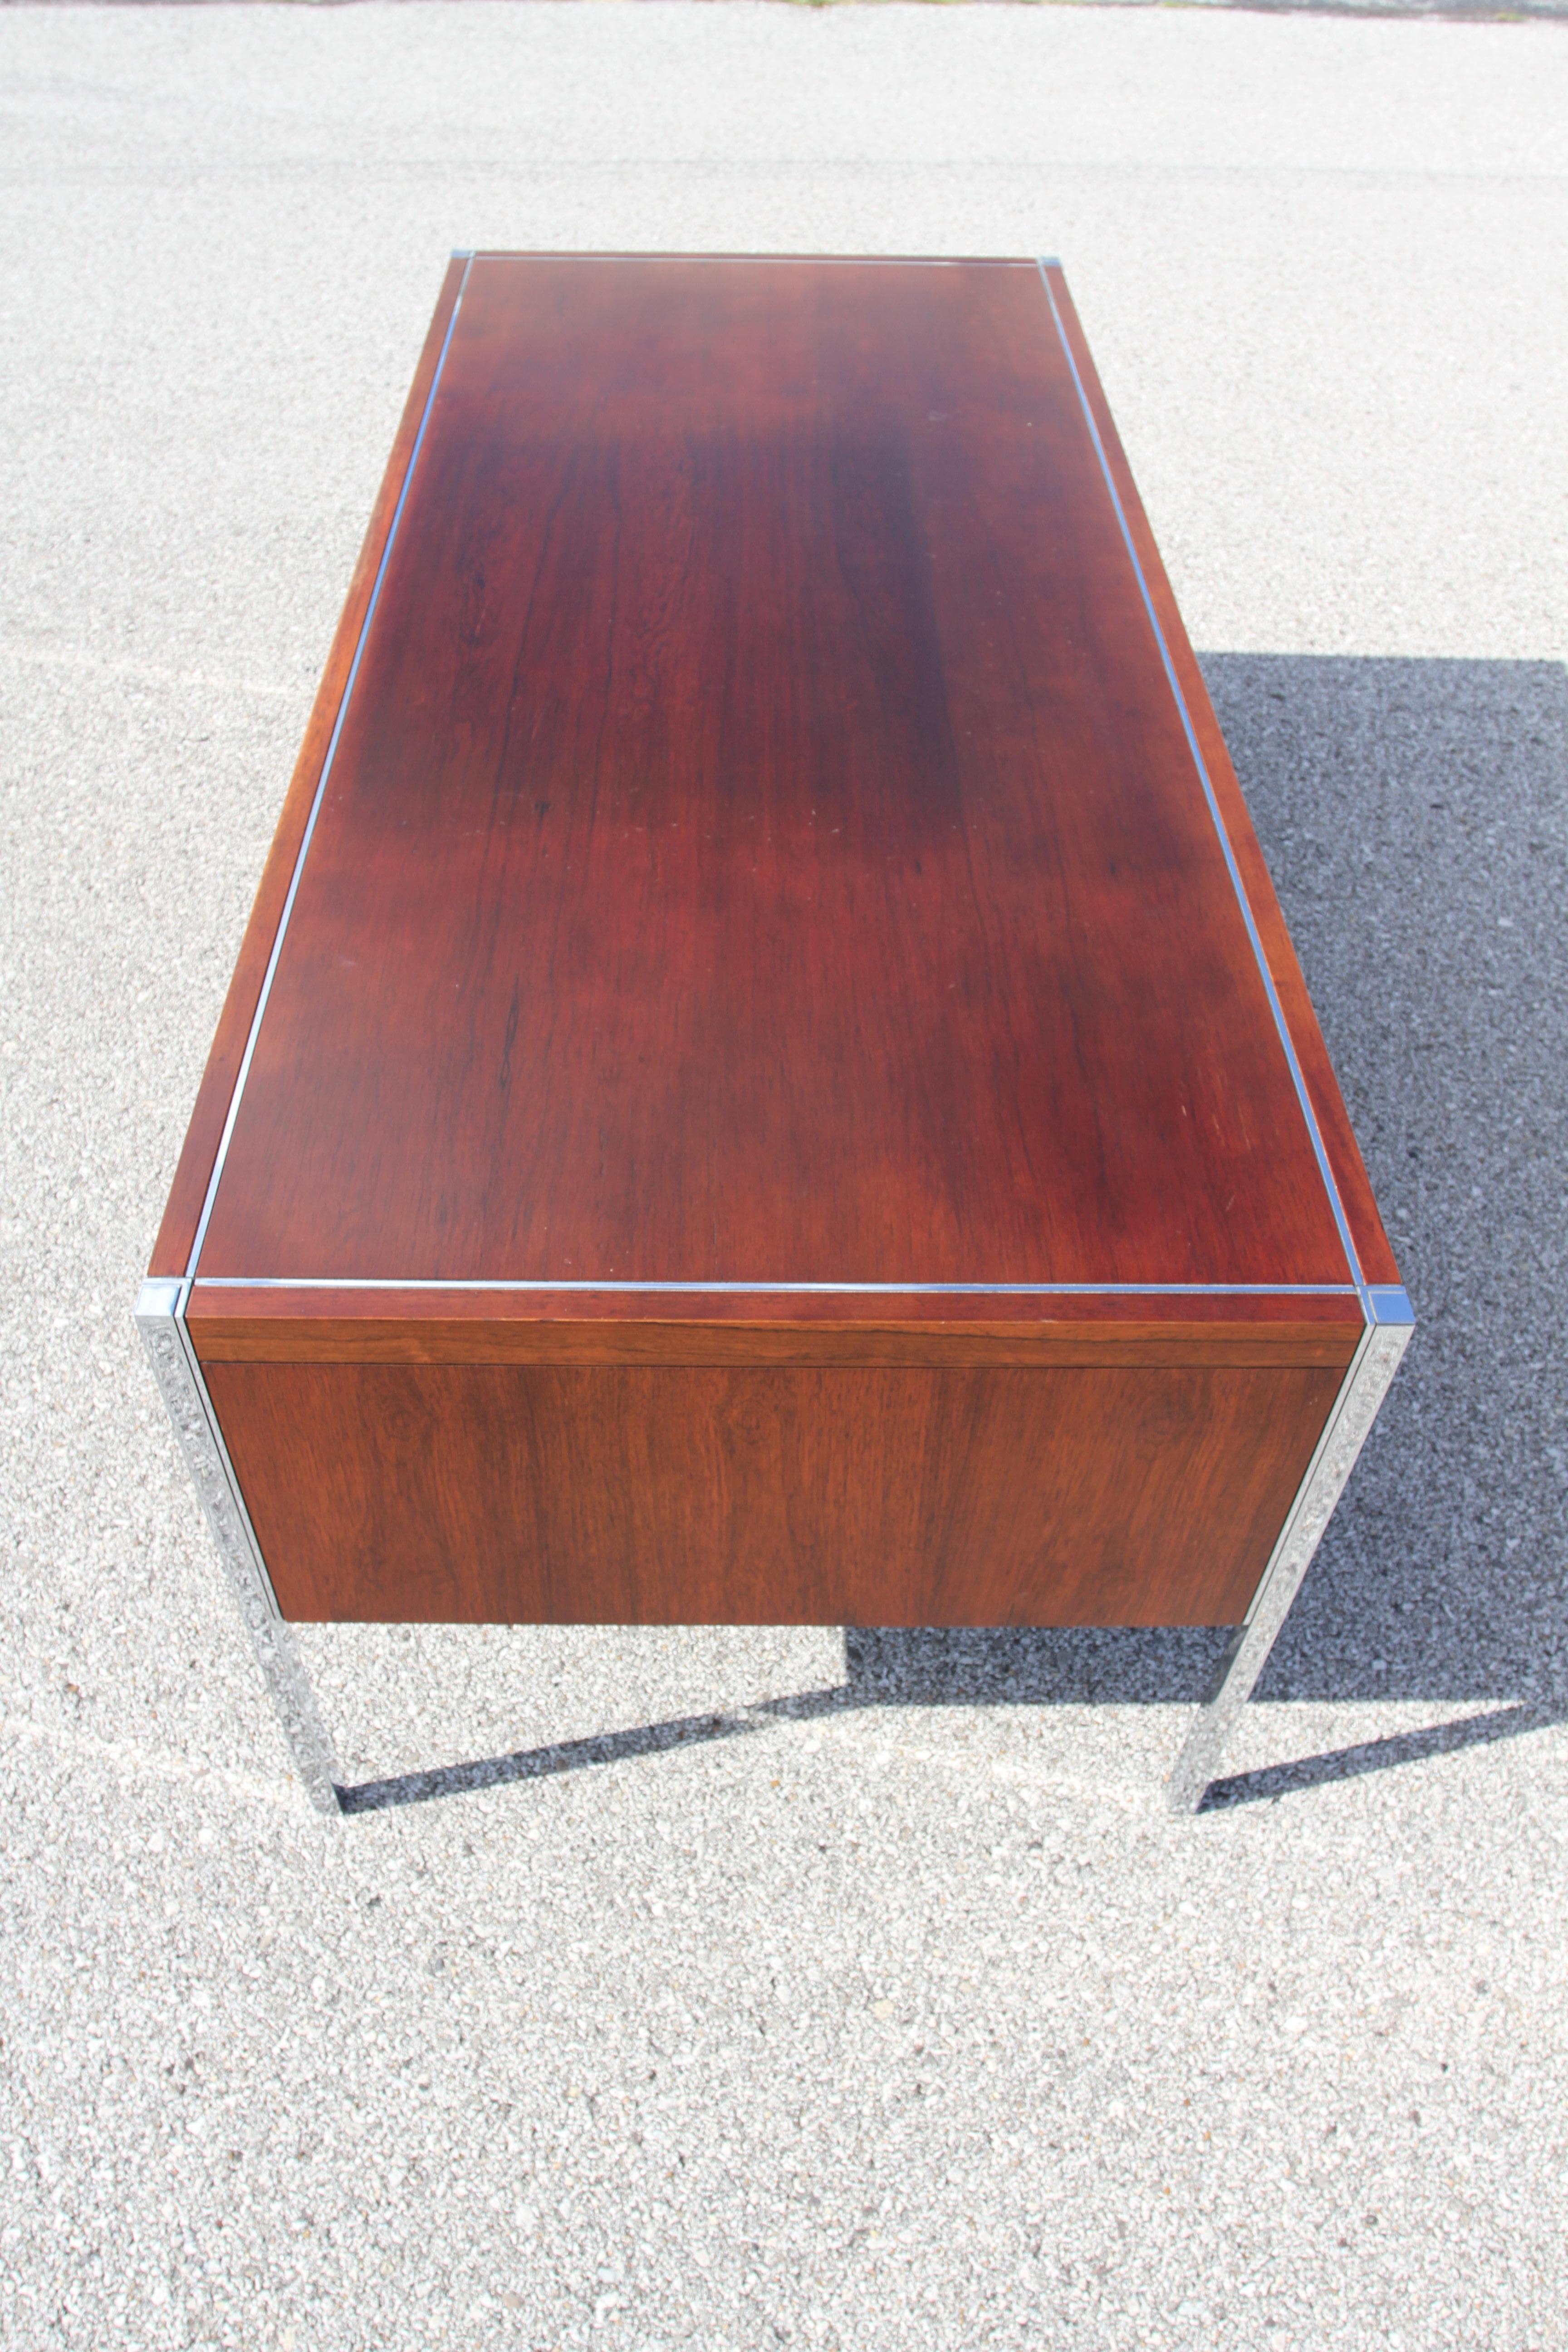 Richard Schultz for Knoll 1960s Mid-Century Modern Rosewood Executive Desk #4146 For Sale 4